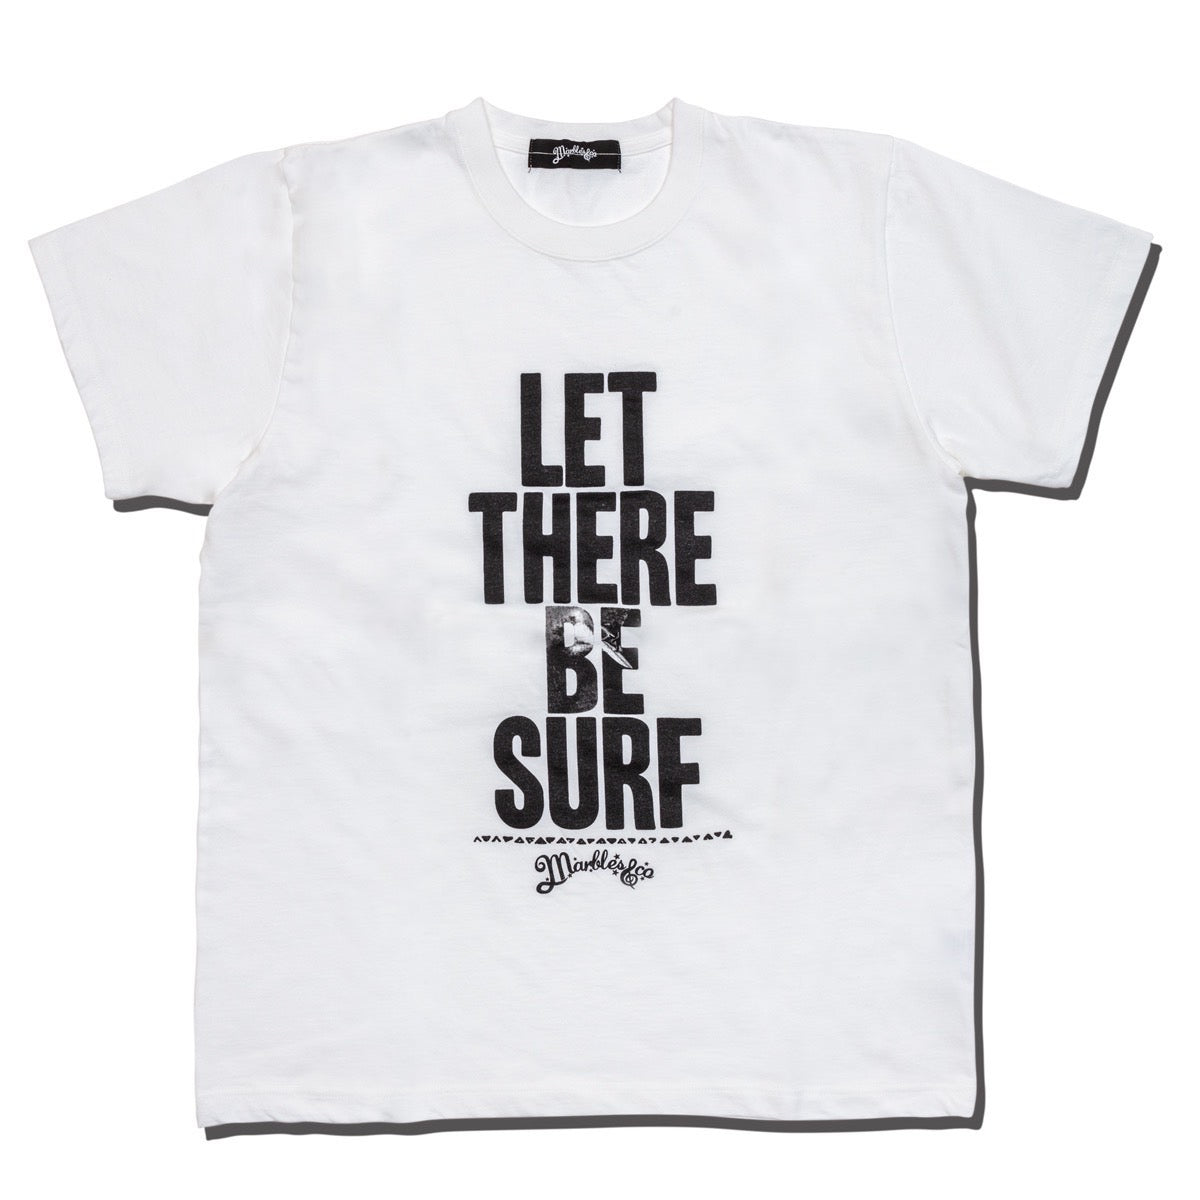 LETTHEREBESURFM × marbles LET THERE BE SURF シャツ